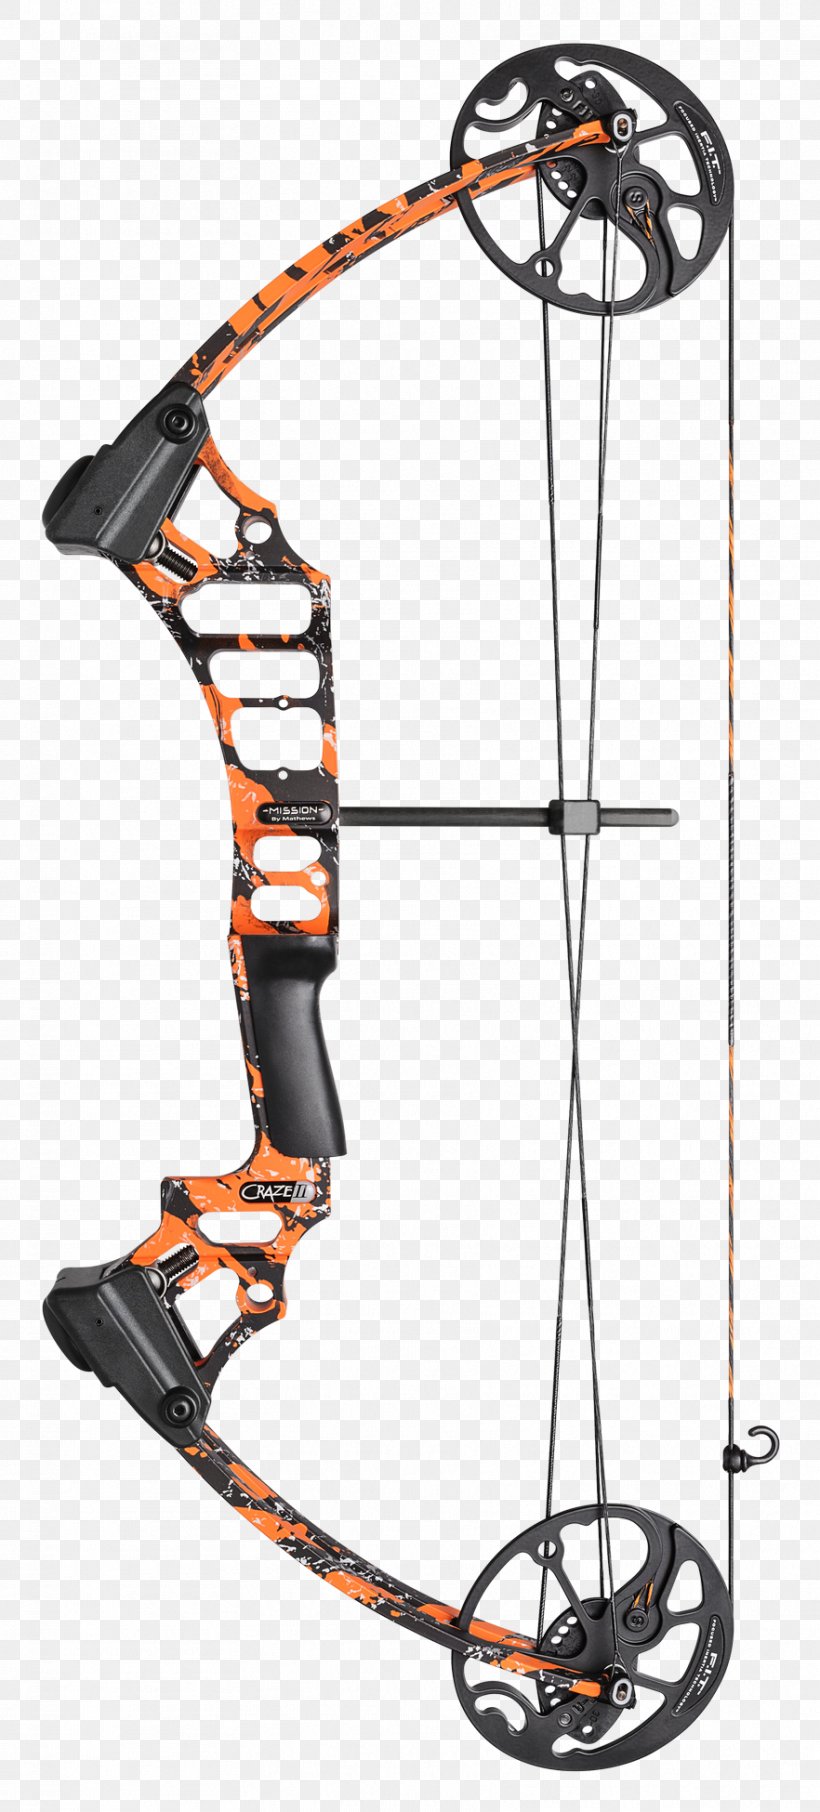 Compound Bows Archery Bowhunting Bow And Arrow, PNG, 882x1950px, Compound Bows, Archery, Archery Country, Bicycle Accessory, Bow And Arrow Download Free